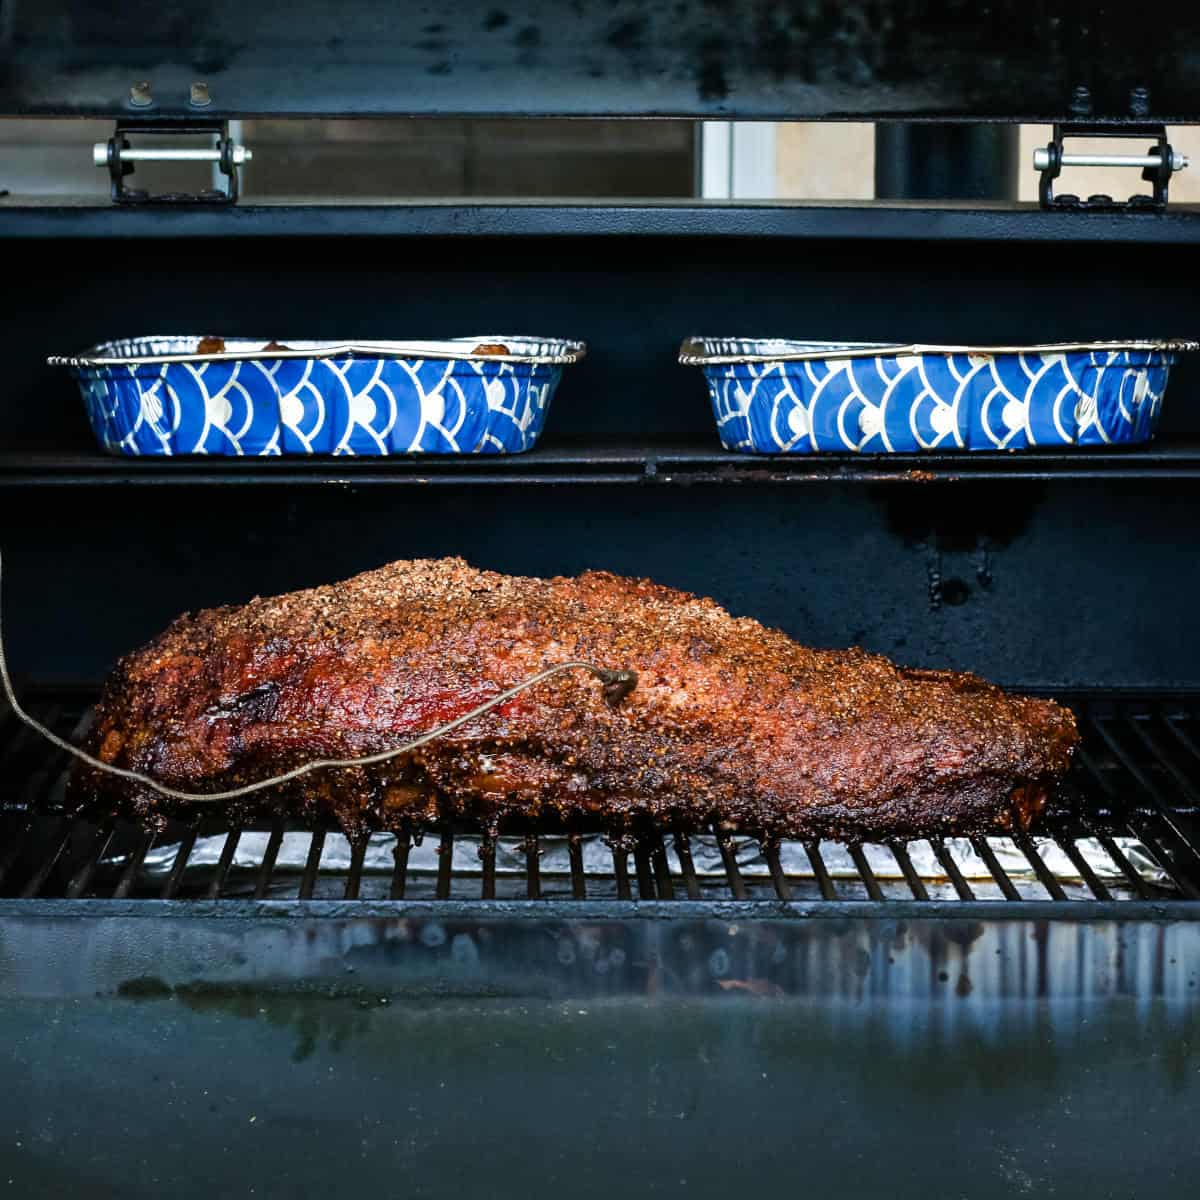 Brisket and the fat trimmings smoking inside a pellet grill.